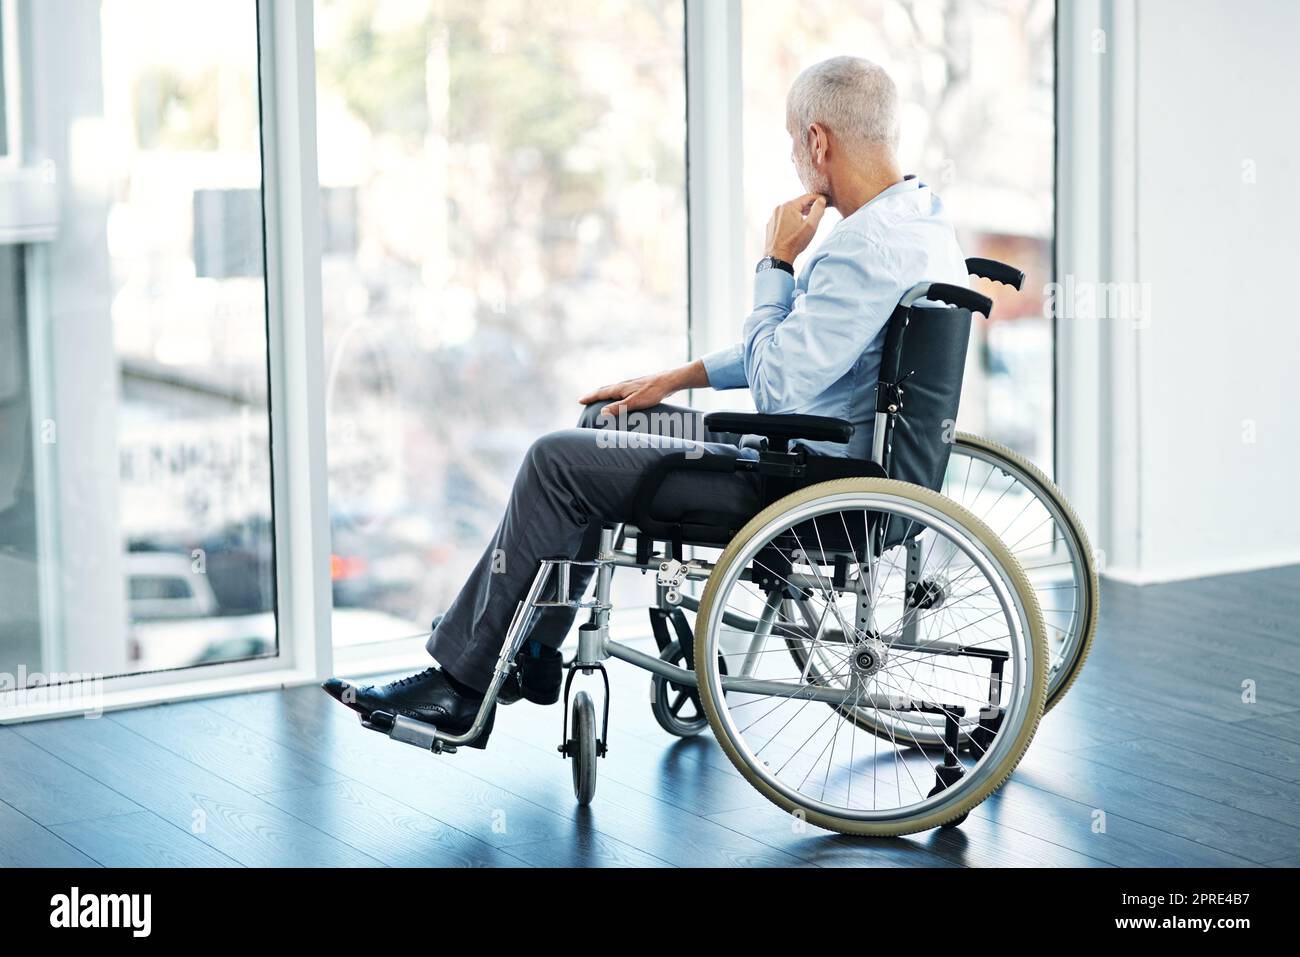 Taking a moment to ponder by himself. a mature man sitting in a wheelchair and looking out the window. Stock Photo